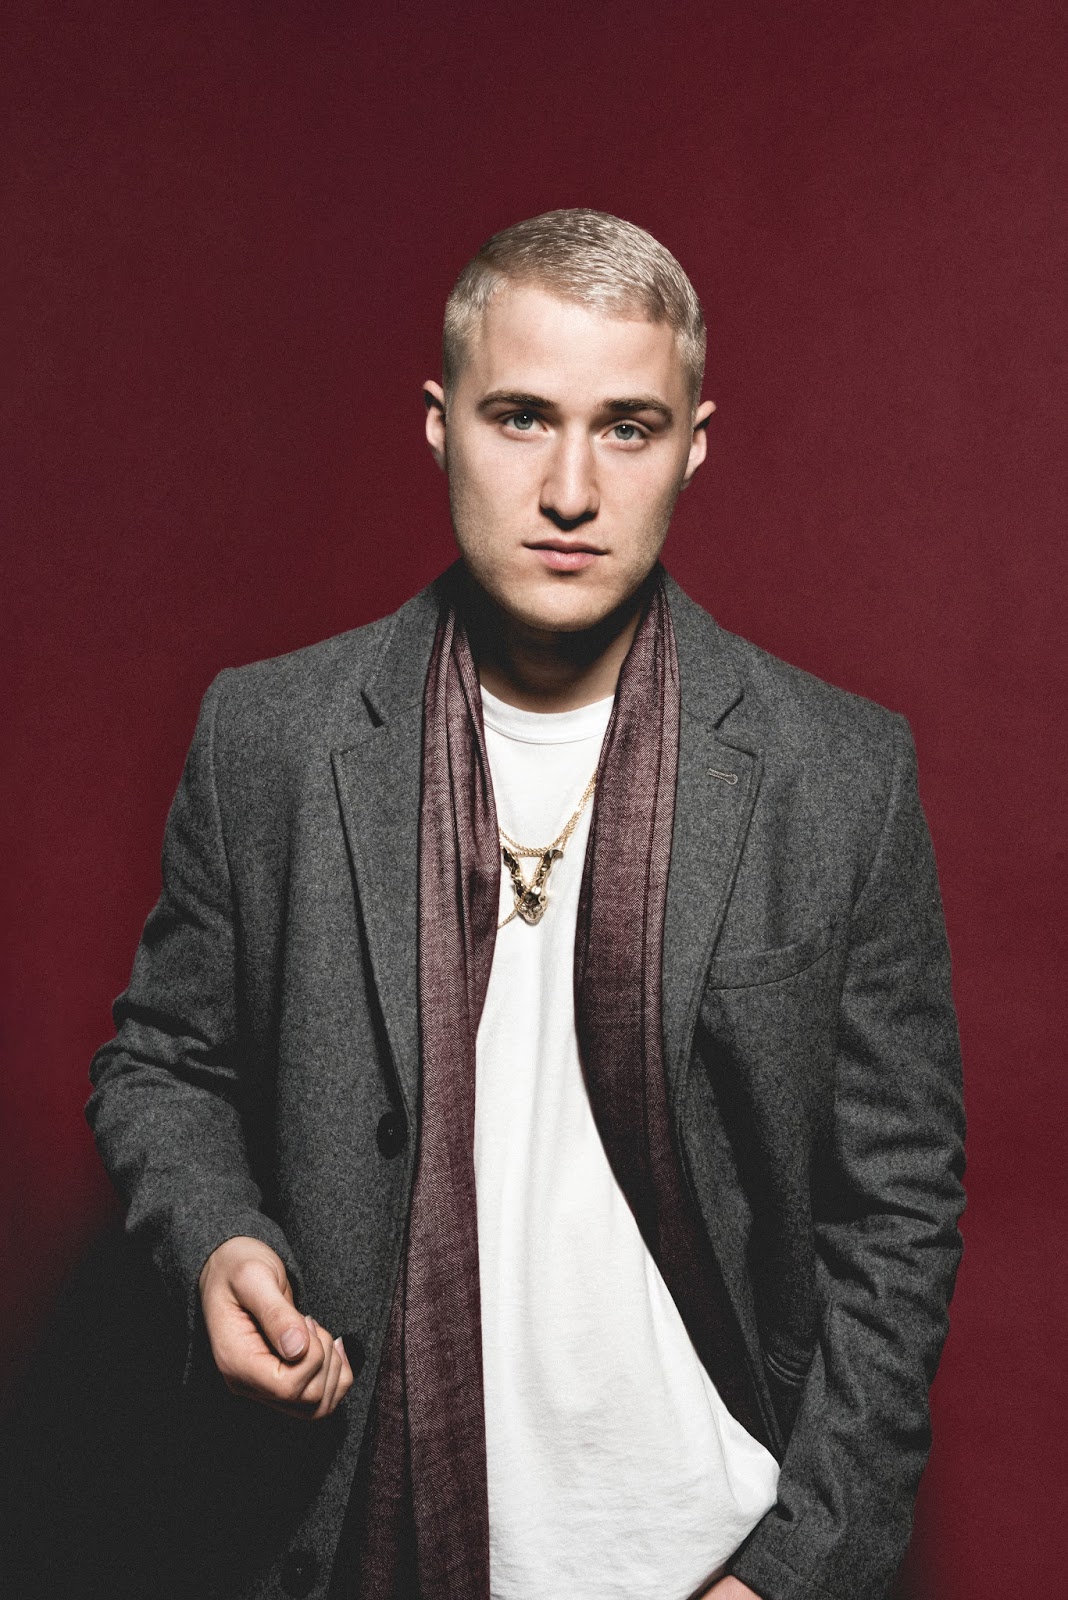 Mike Posner for Island Records - February 10, 2016
Photo credit: Meredith Truax
